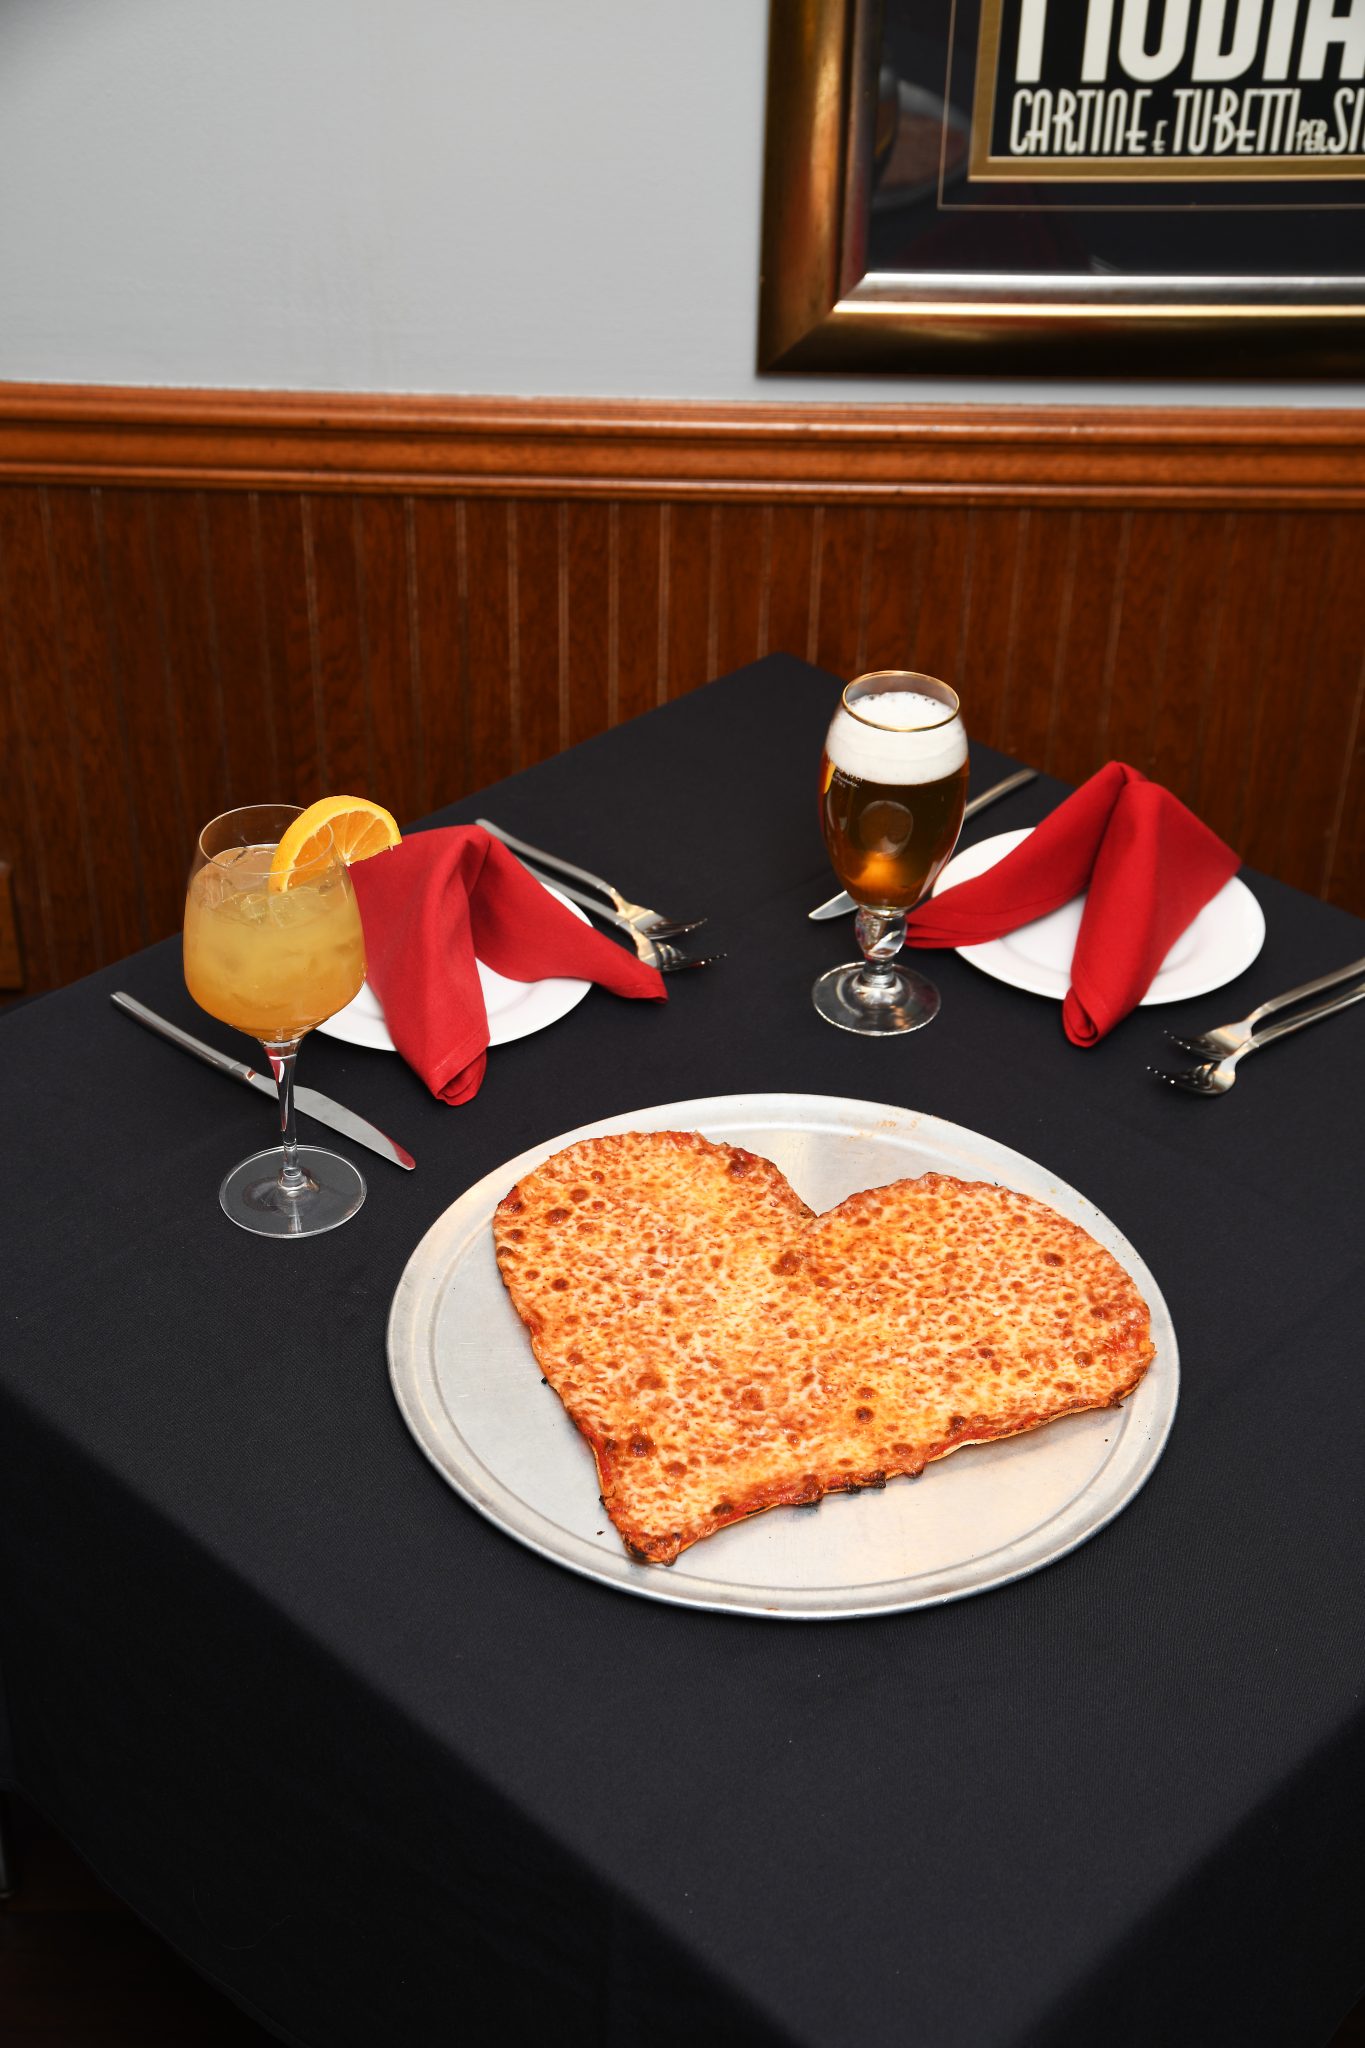 Heart Pizza on resturant table with drinks and plates